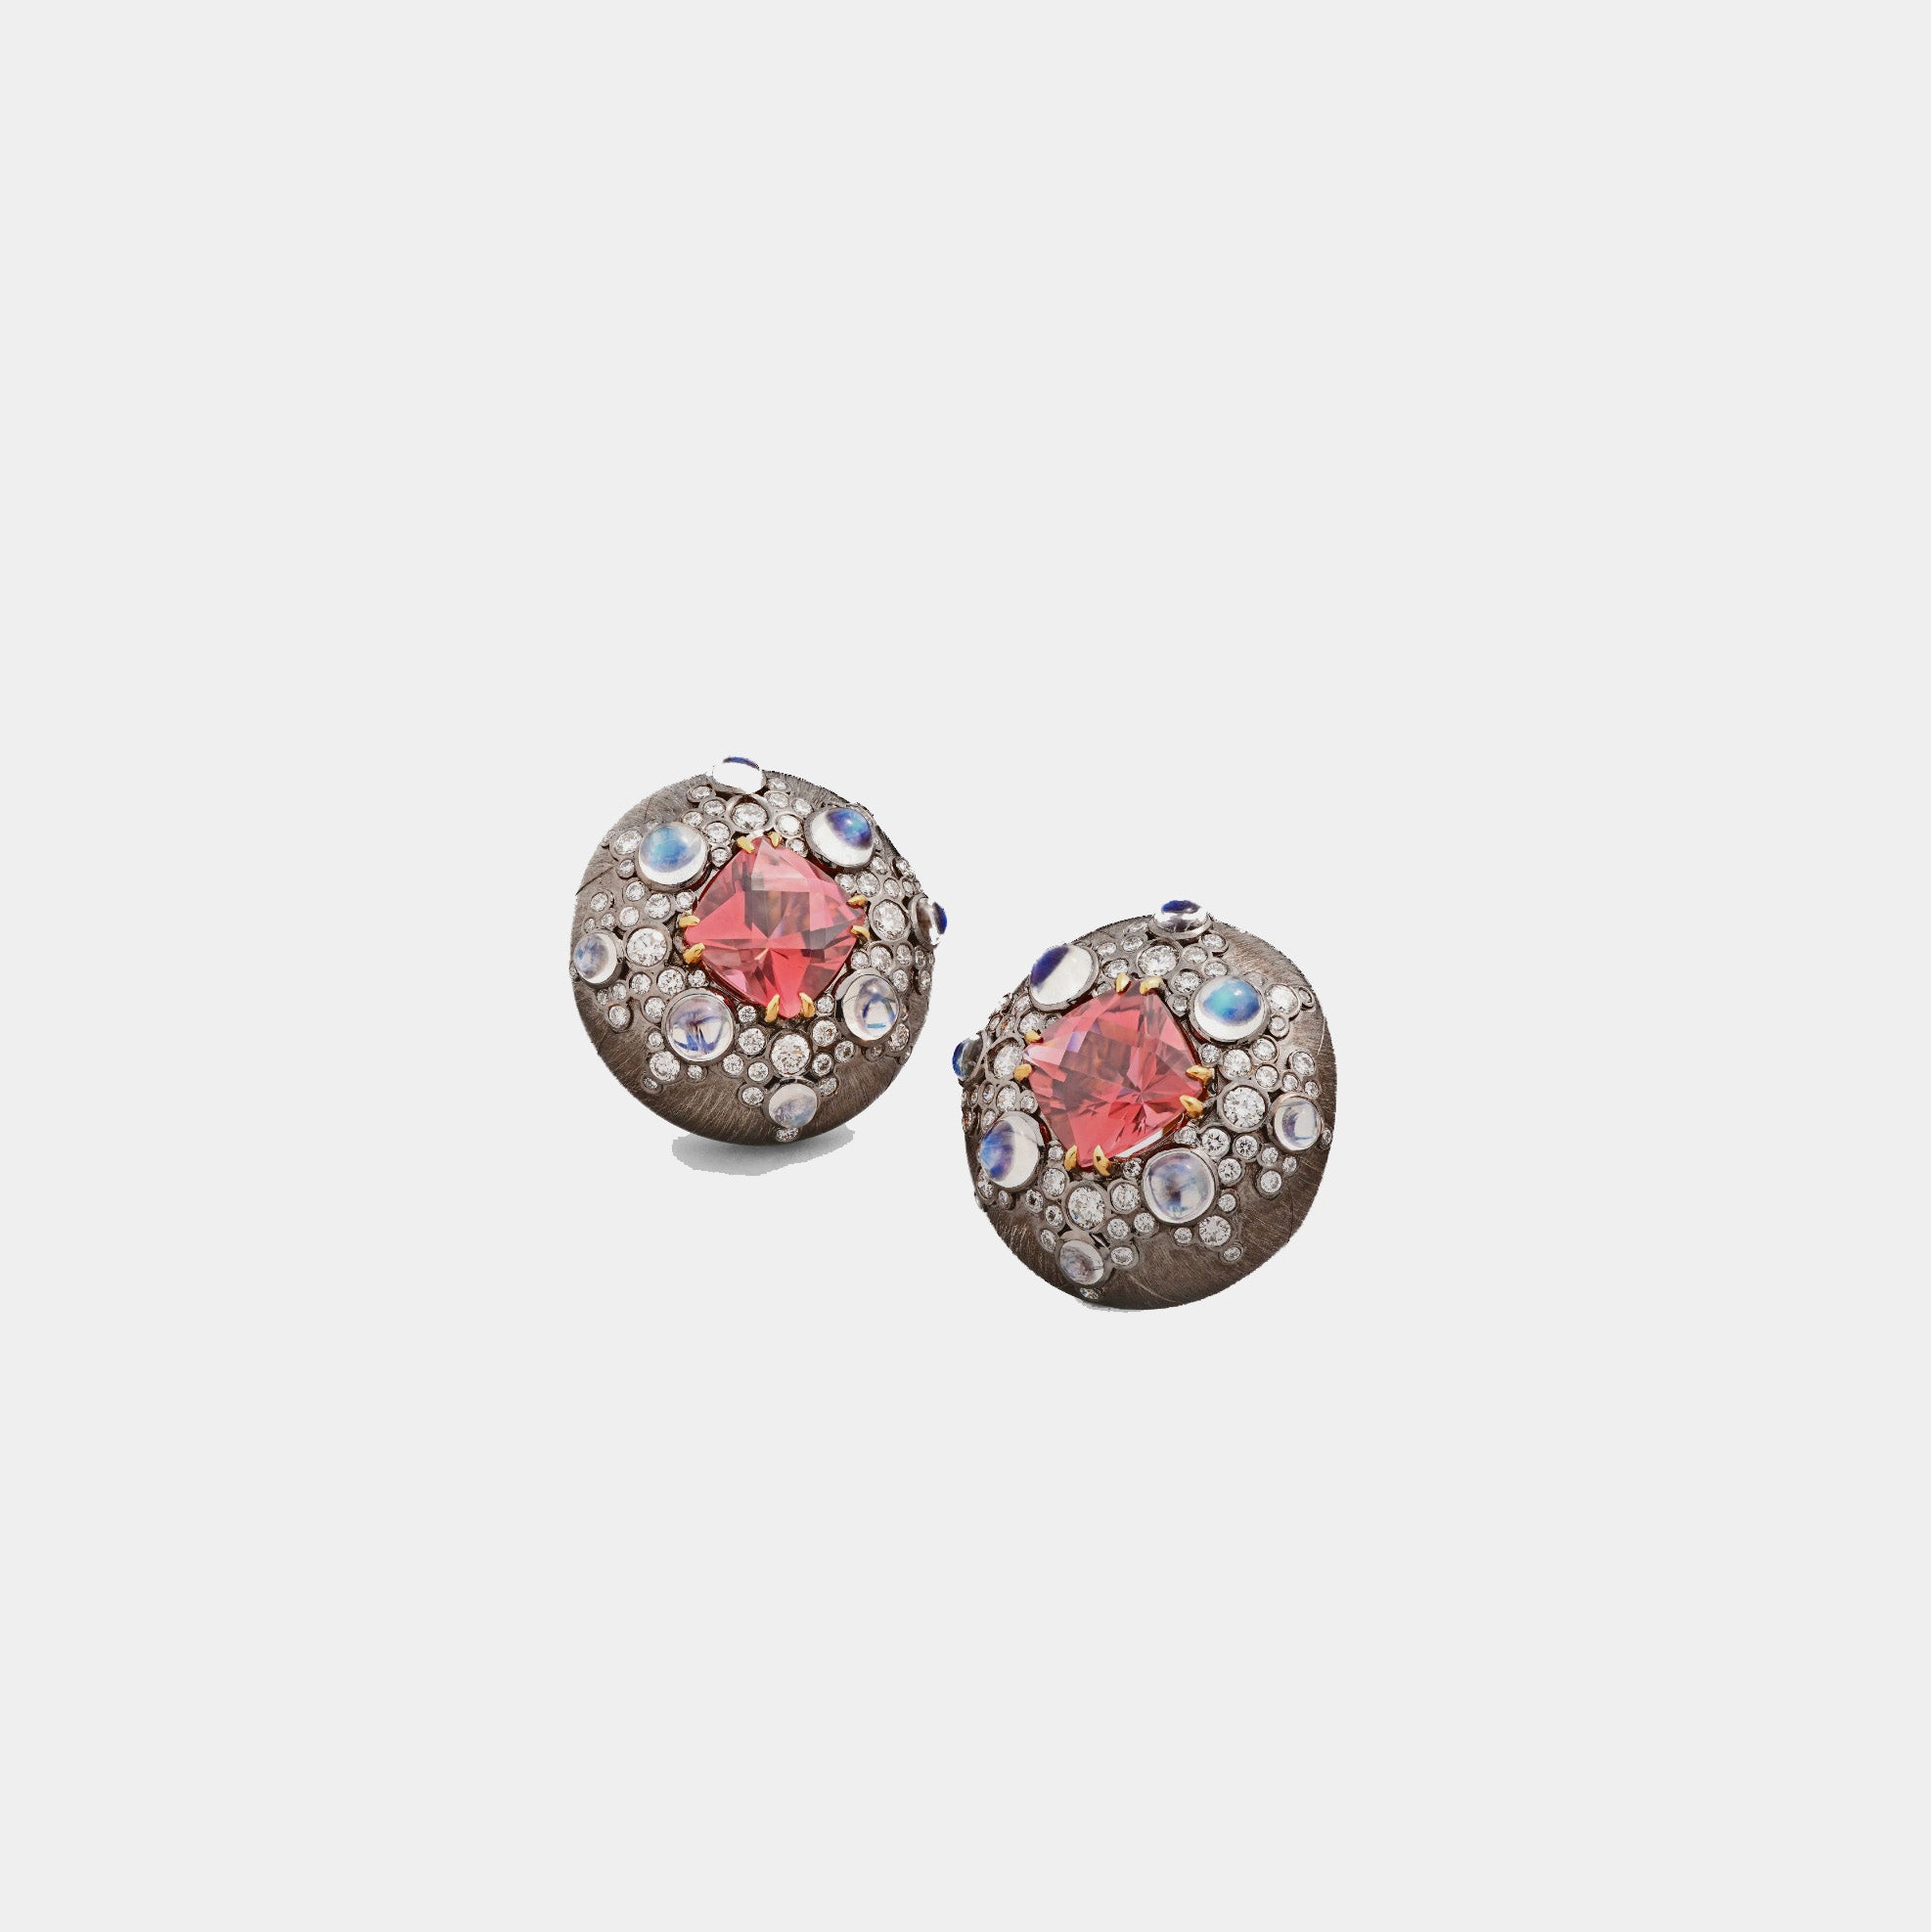 Constellation button earrings with cushion cut tourmalines, moonstone and diamonds